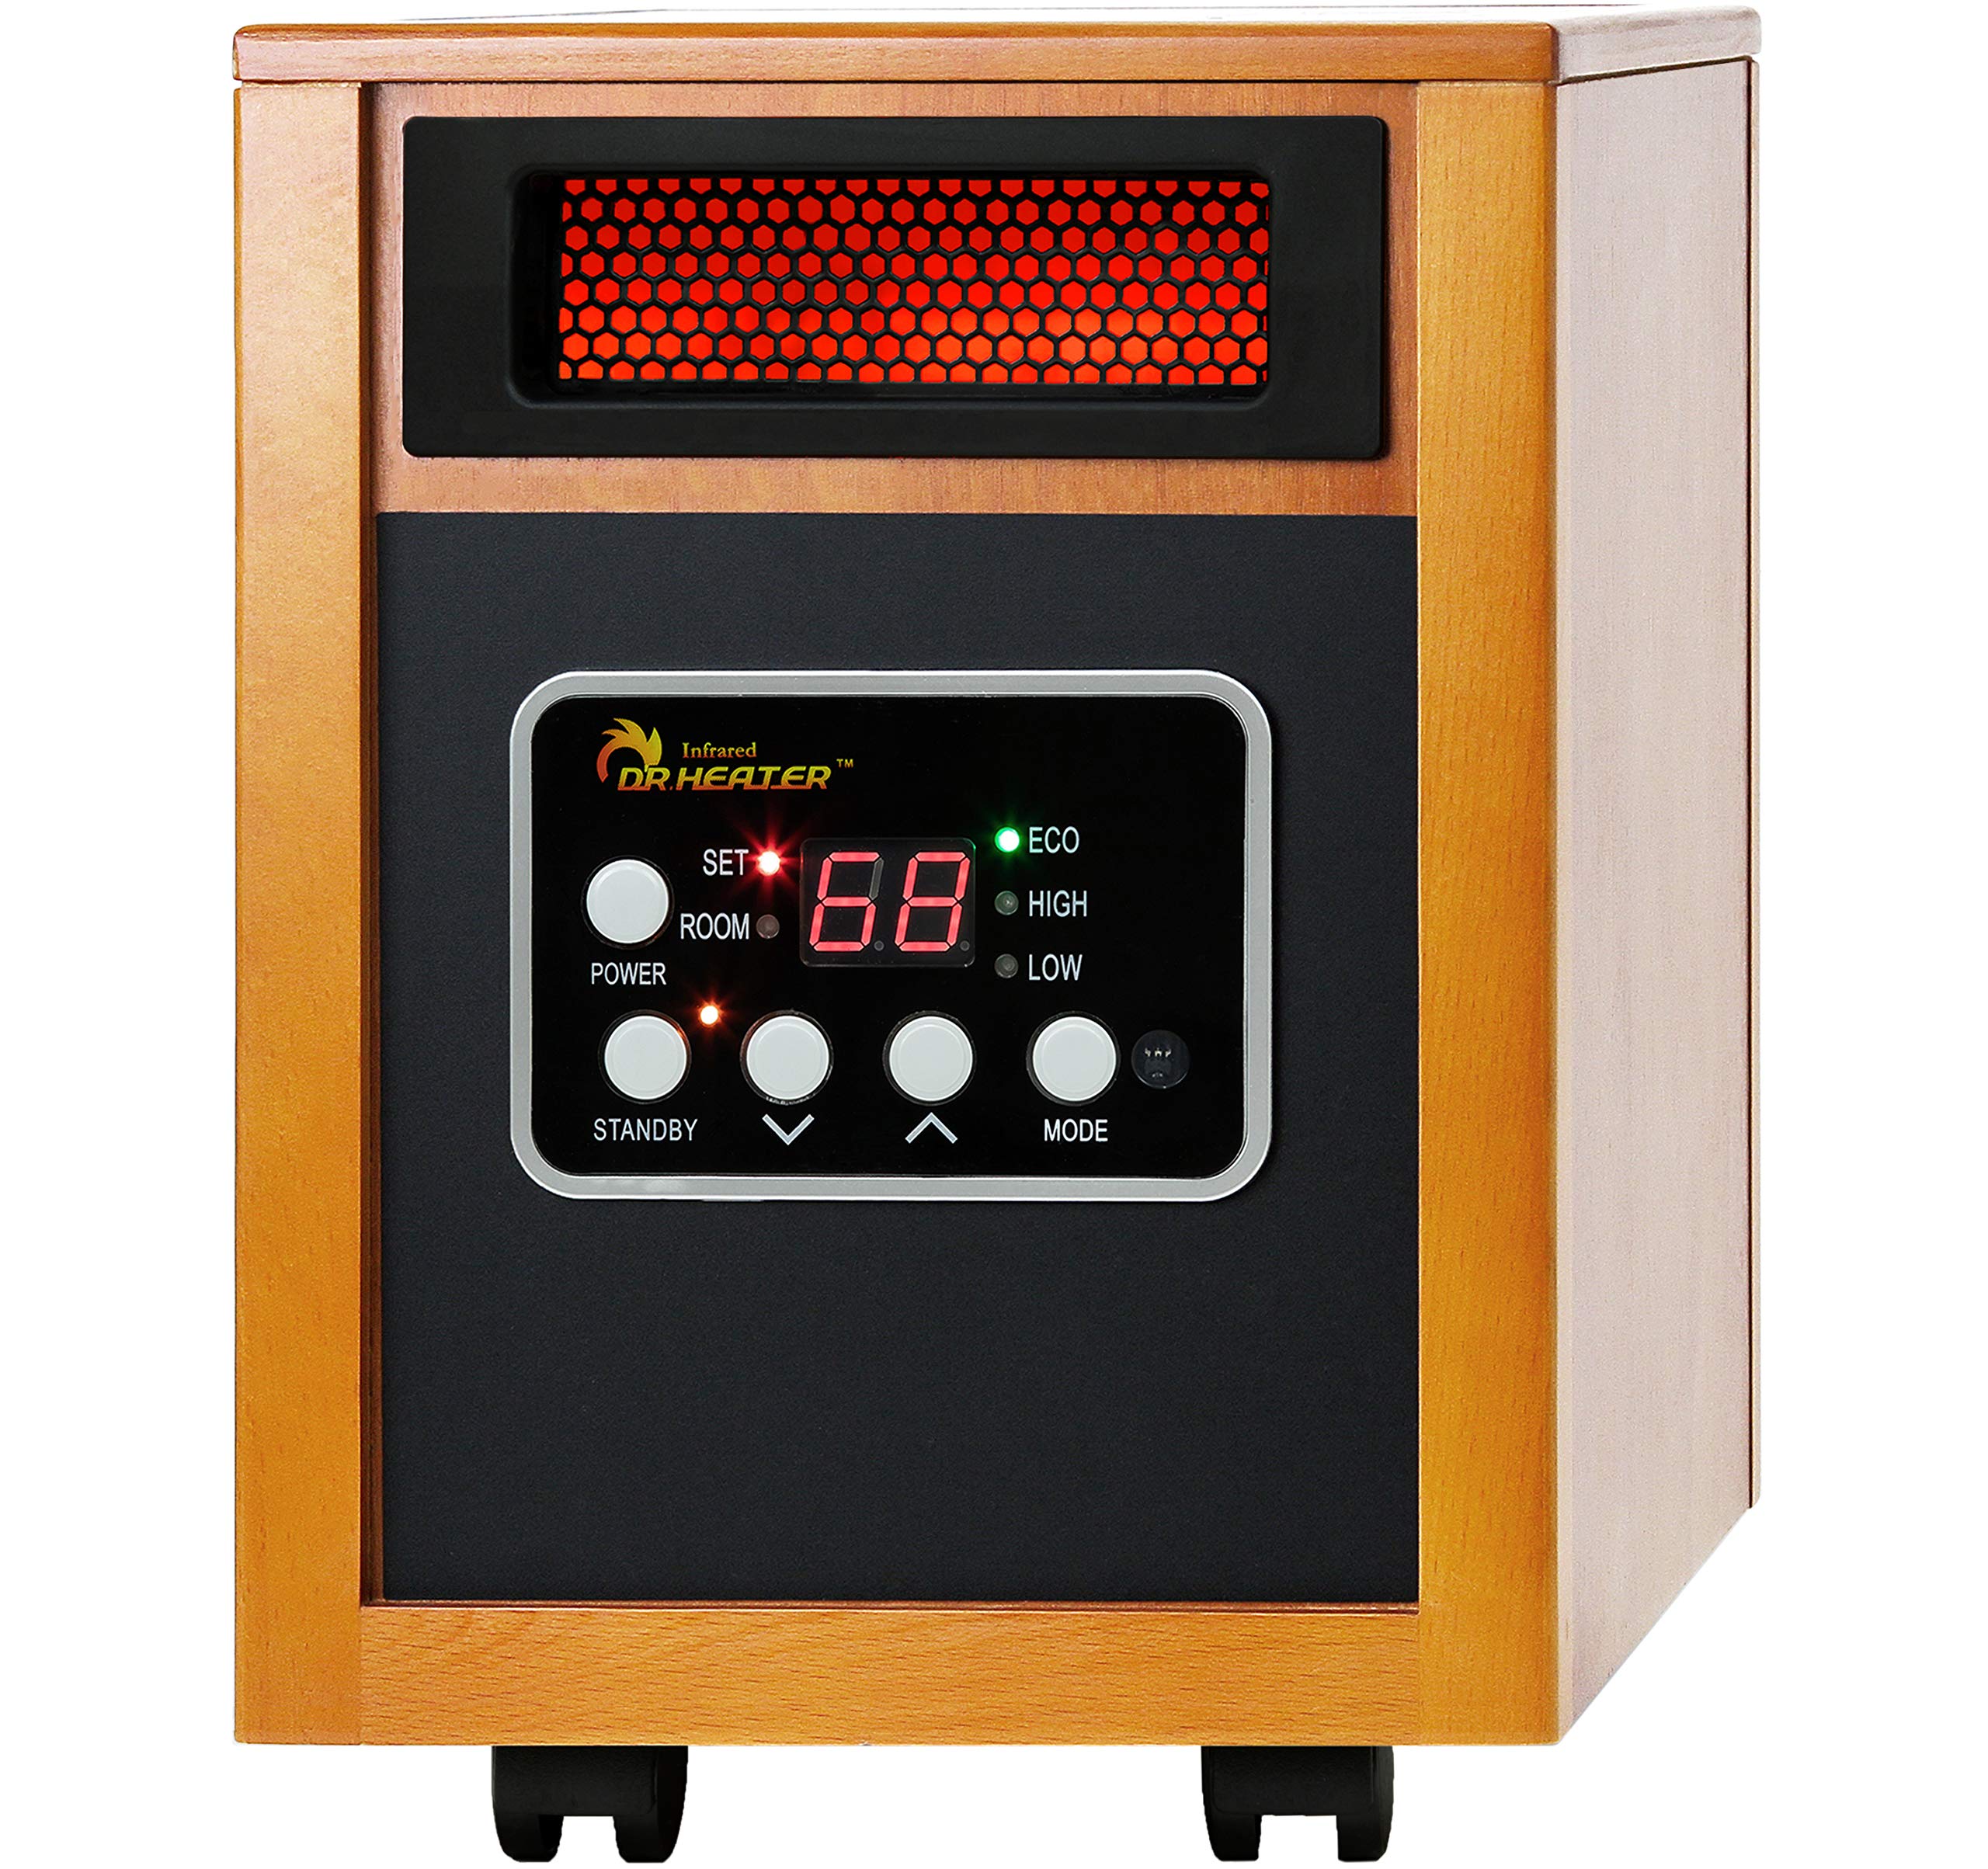 Dr Infrared Heater 